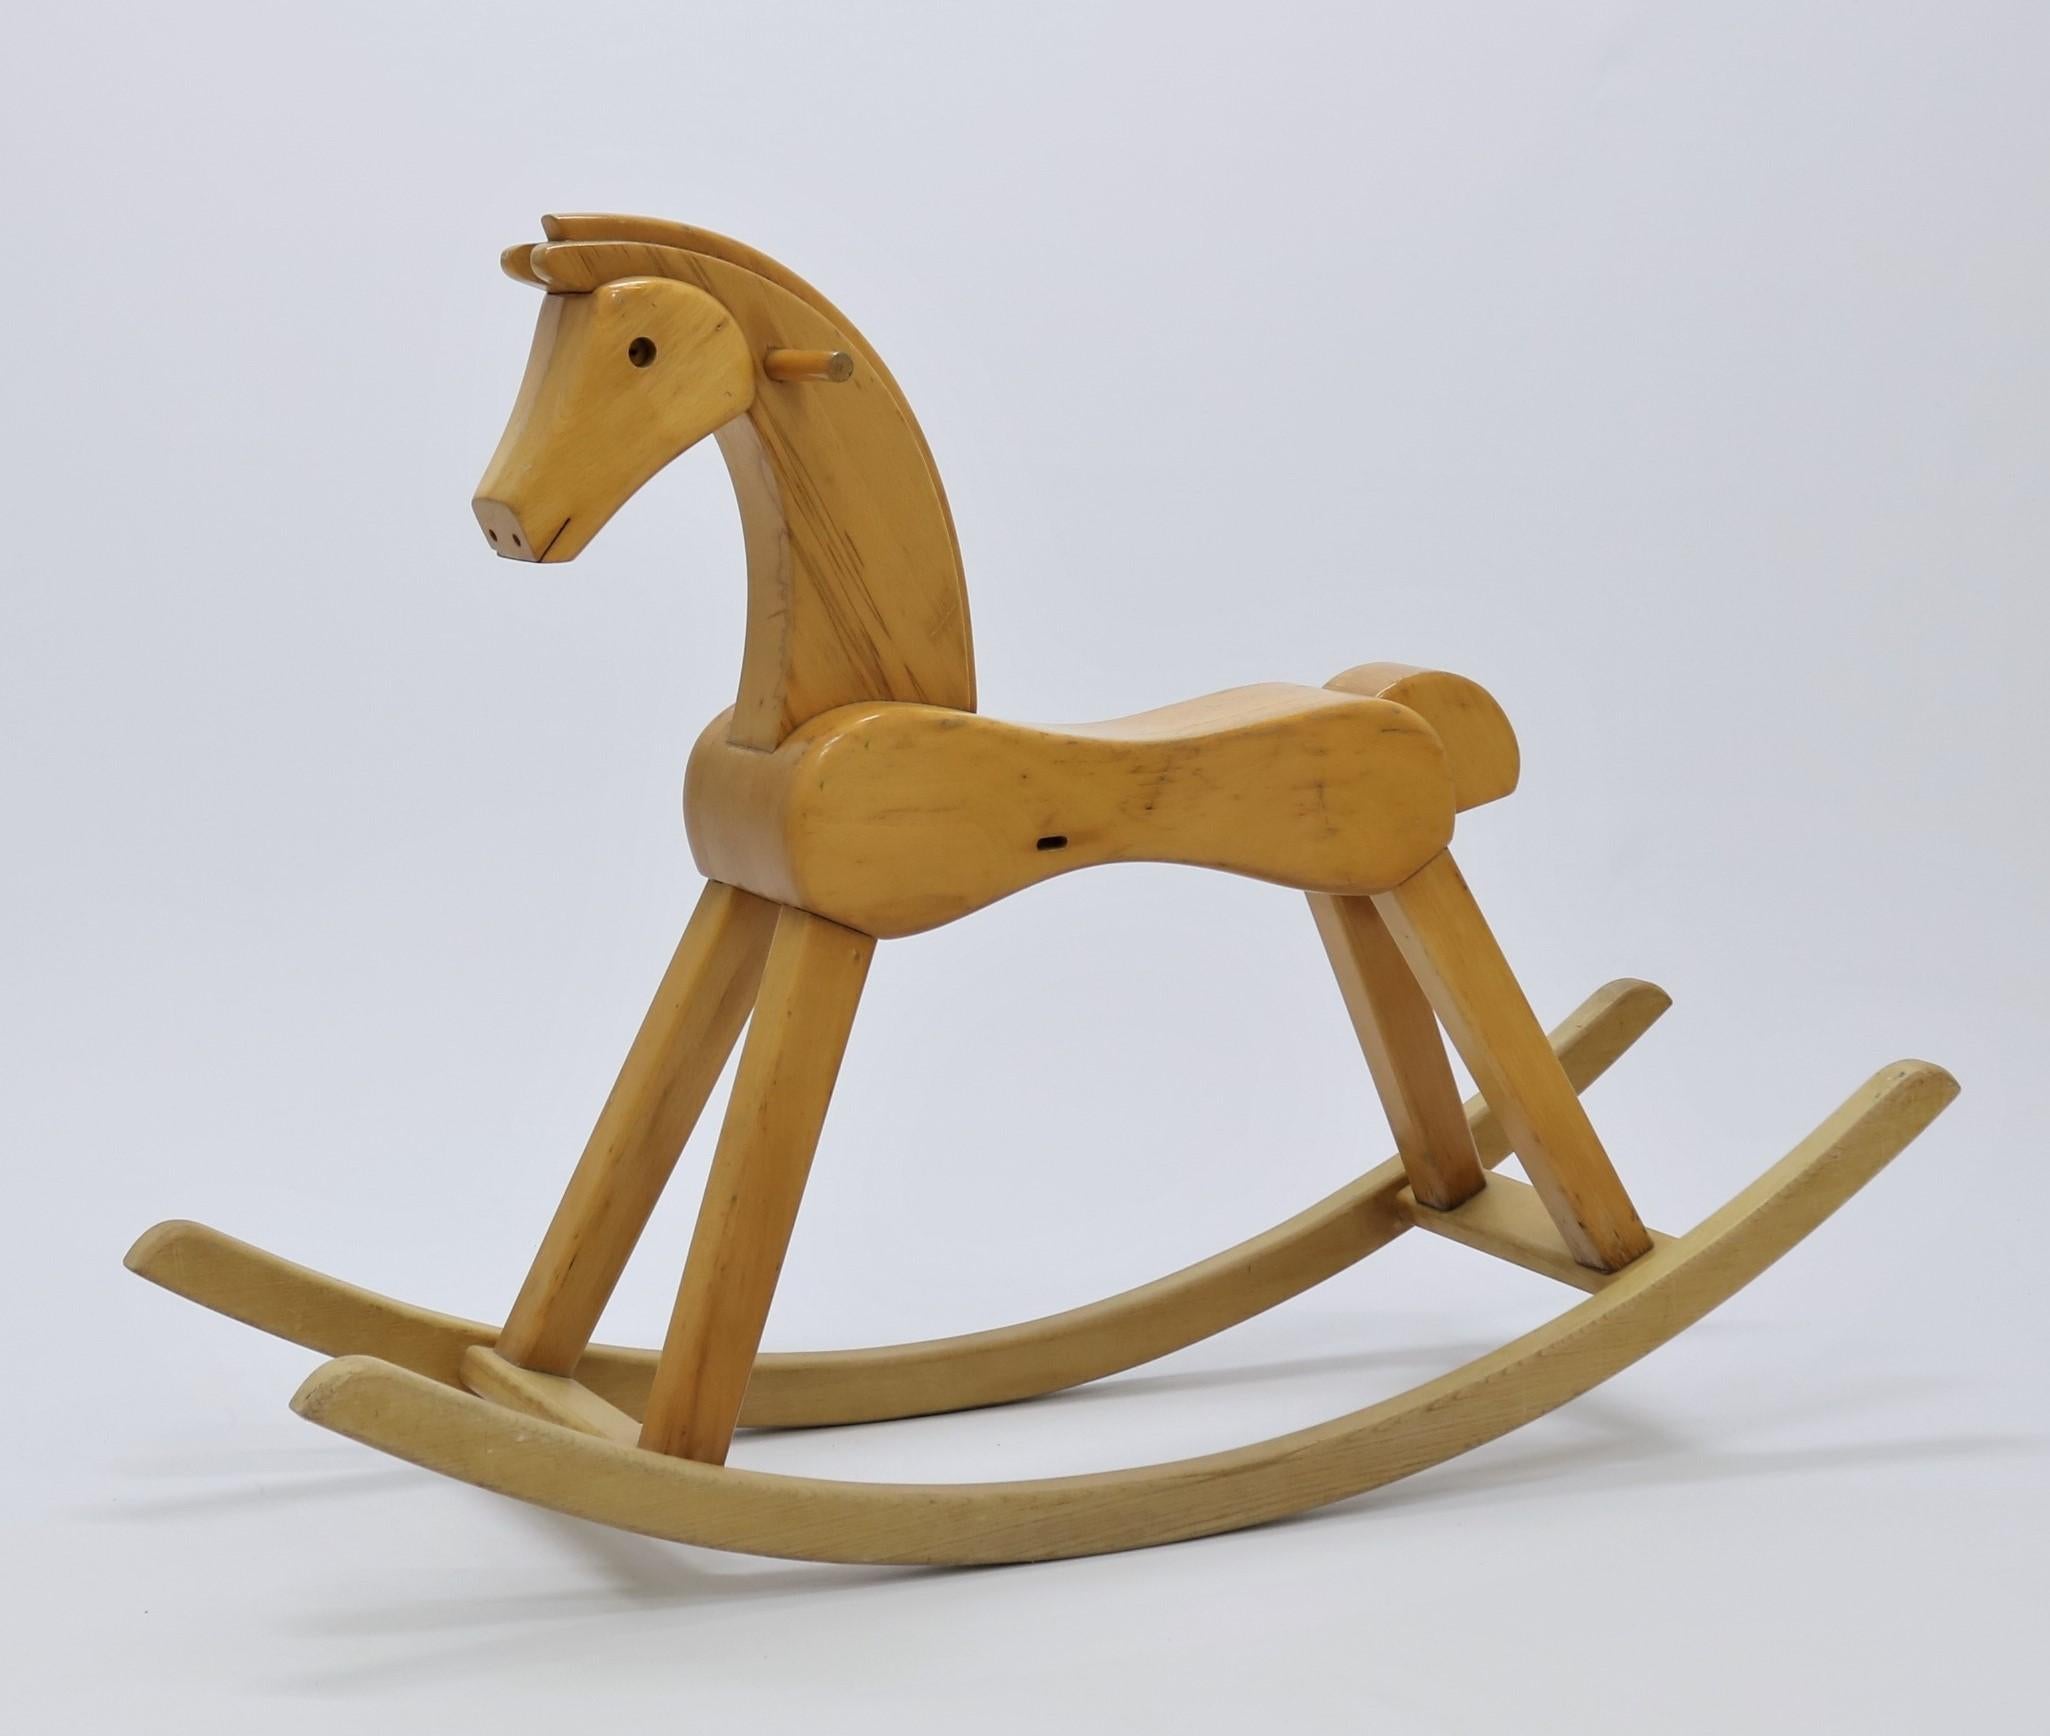 Very rare and large edition of Danish designer Kay Bojesen´s iconic and beloved children’s rocking horse. This larger model, called 